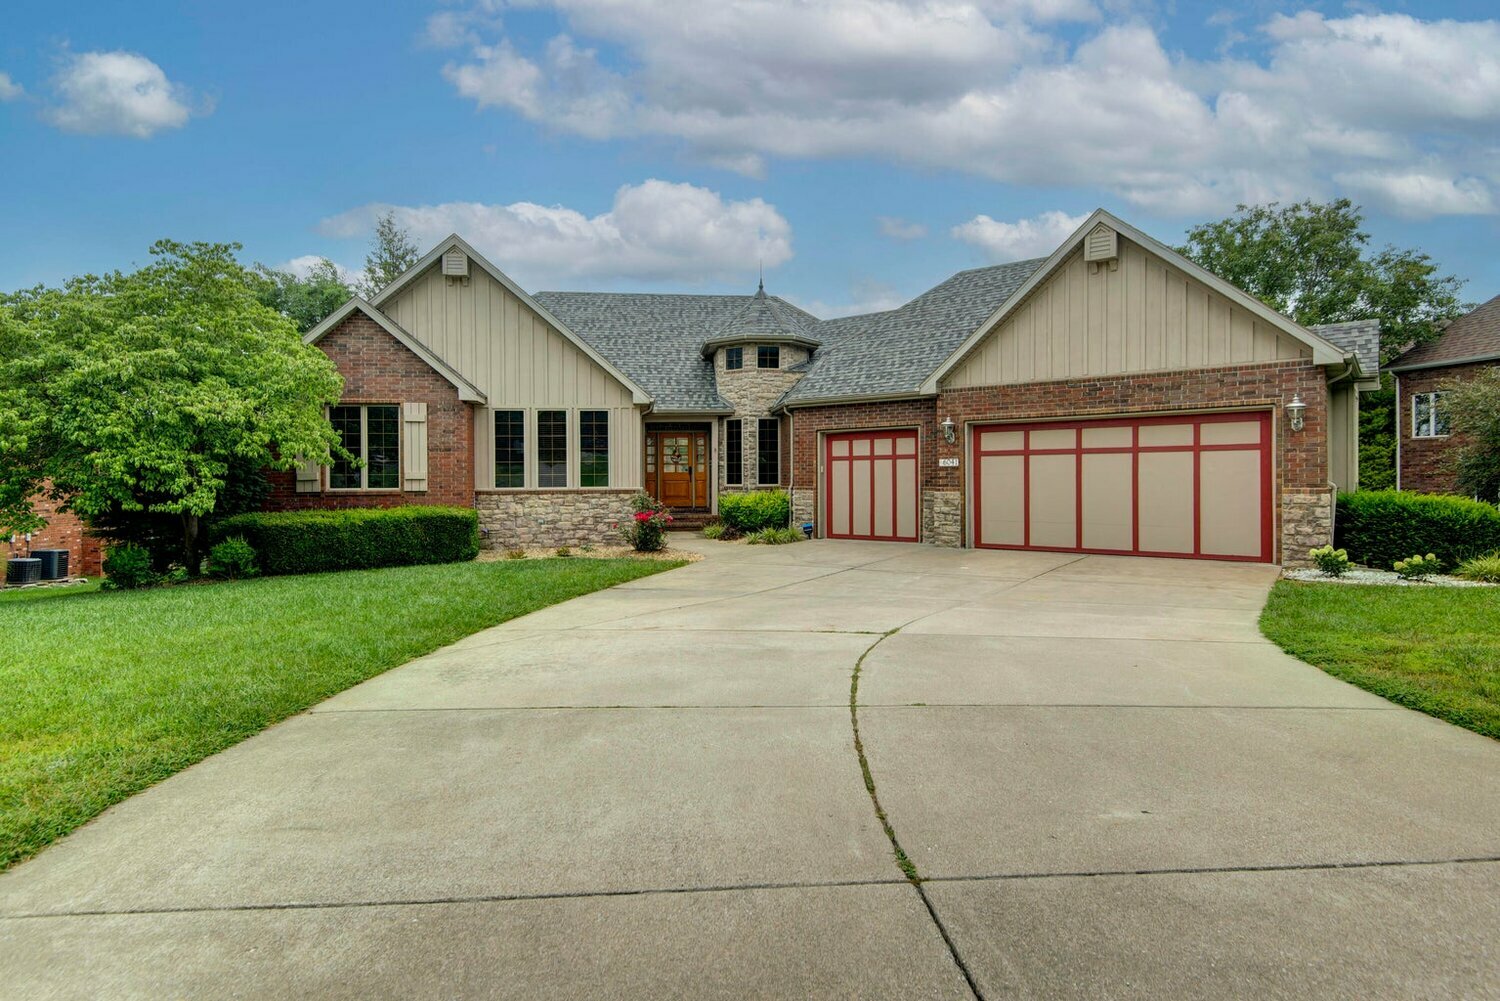 A residence at 6041 S. Brightwater Trail was among homes listed for sale in Springfield last month.